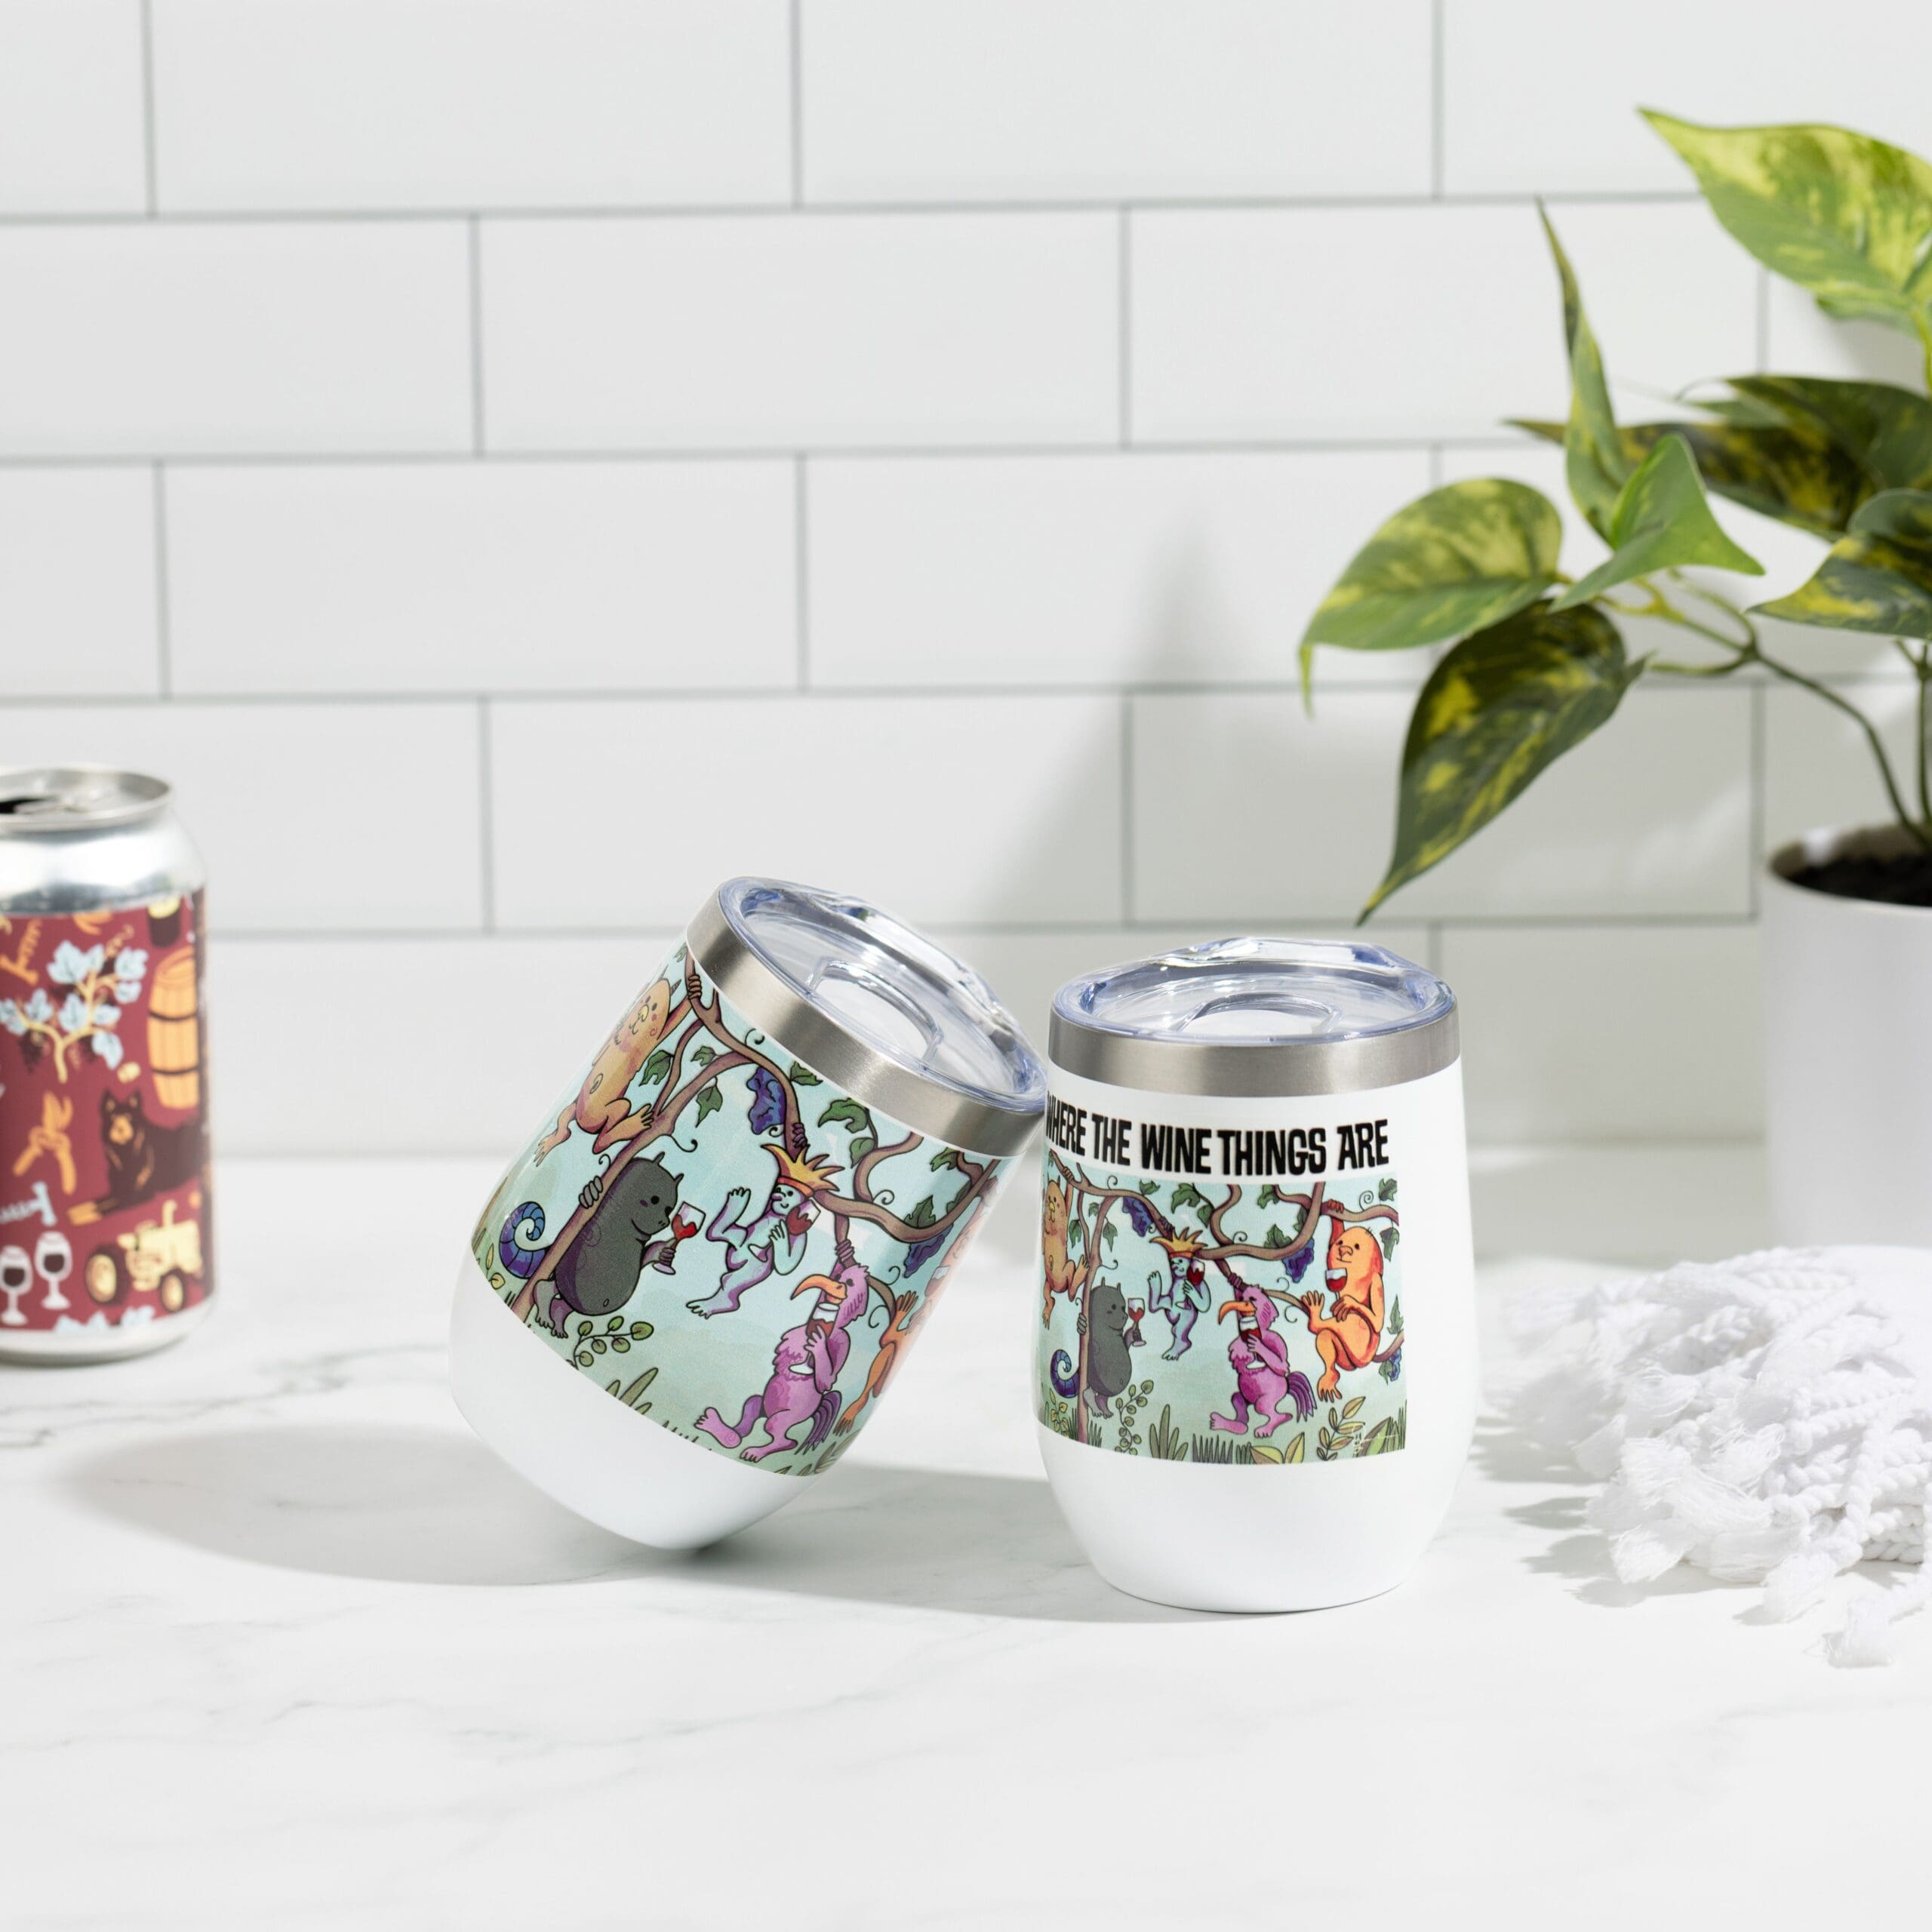 Two wine tumblers on kitchen counter with a wine can to the left and potted plant to the right